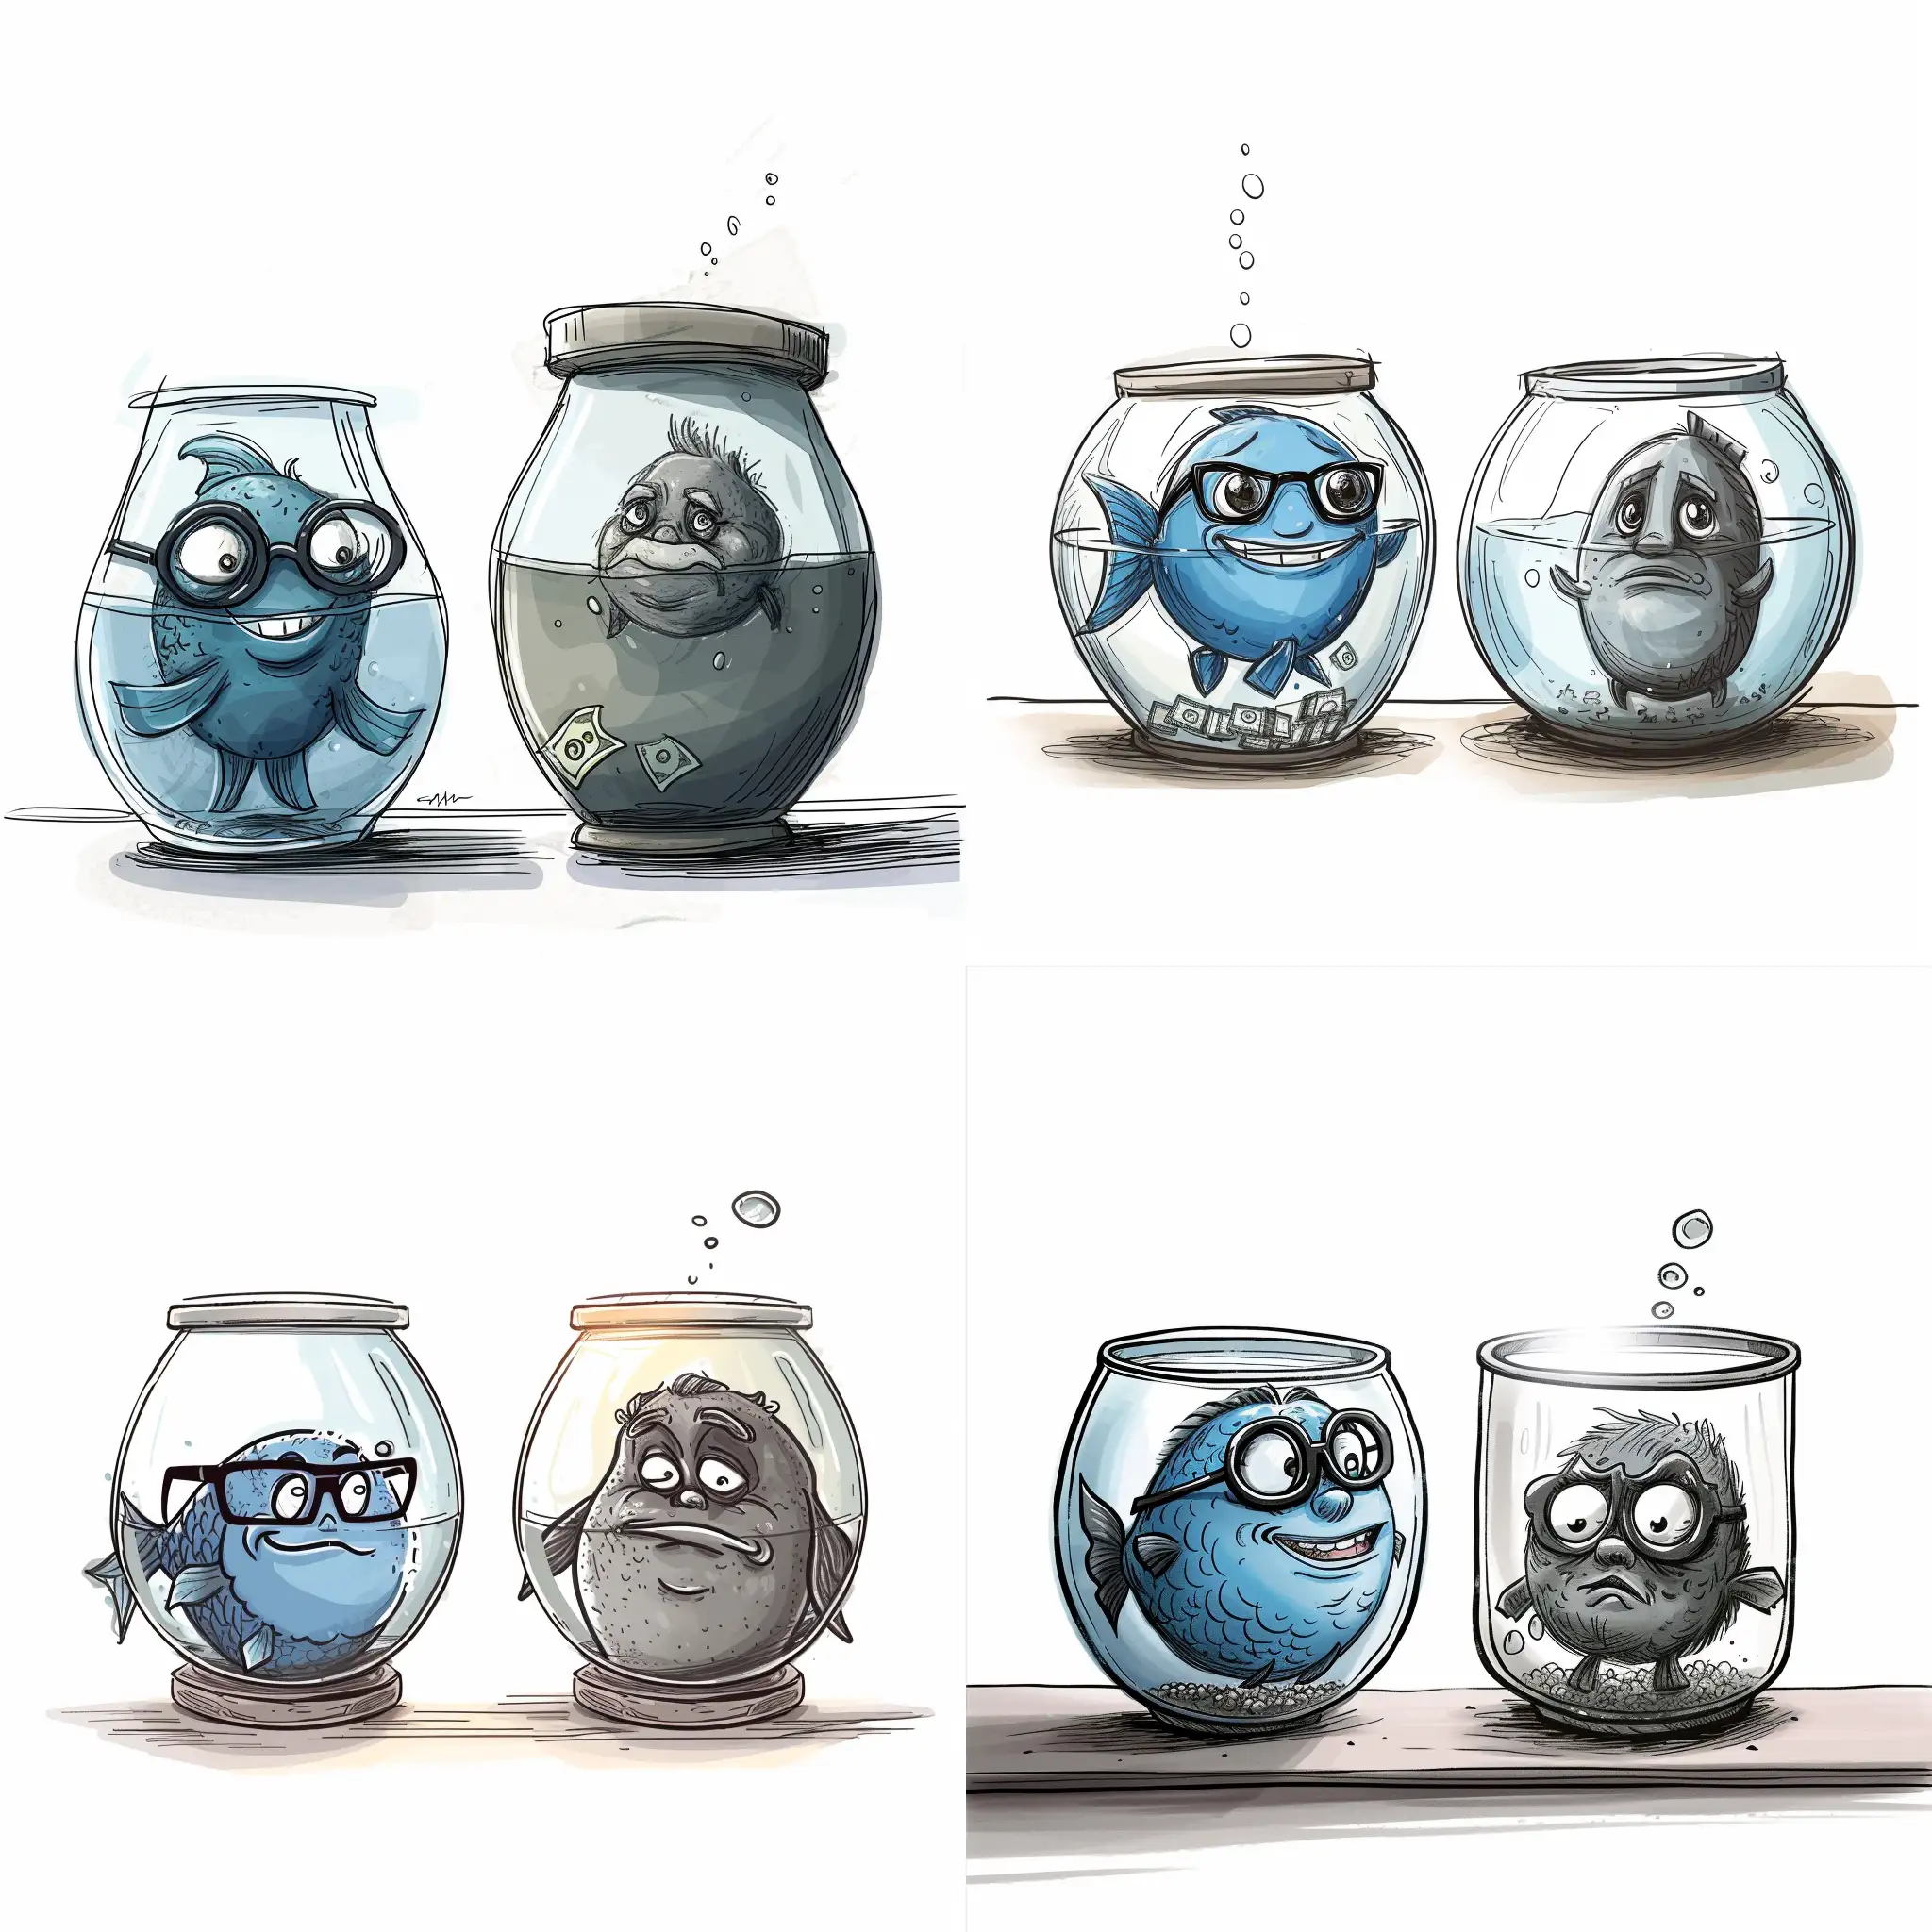 two fishbowls next to each others. One of them contains a blue fish it looks smiling and beautiful, has money, and wears elegant black glasses. The other contains a gray fish that looks sad and poor. There is a light shining horizontally on the aquarium that  contains only the blue fish but not the other fish. Vector sketch drawing illustrator style on white background. 